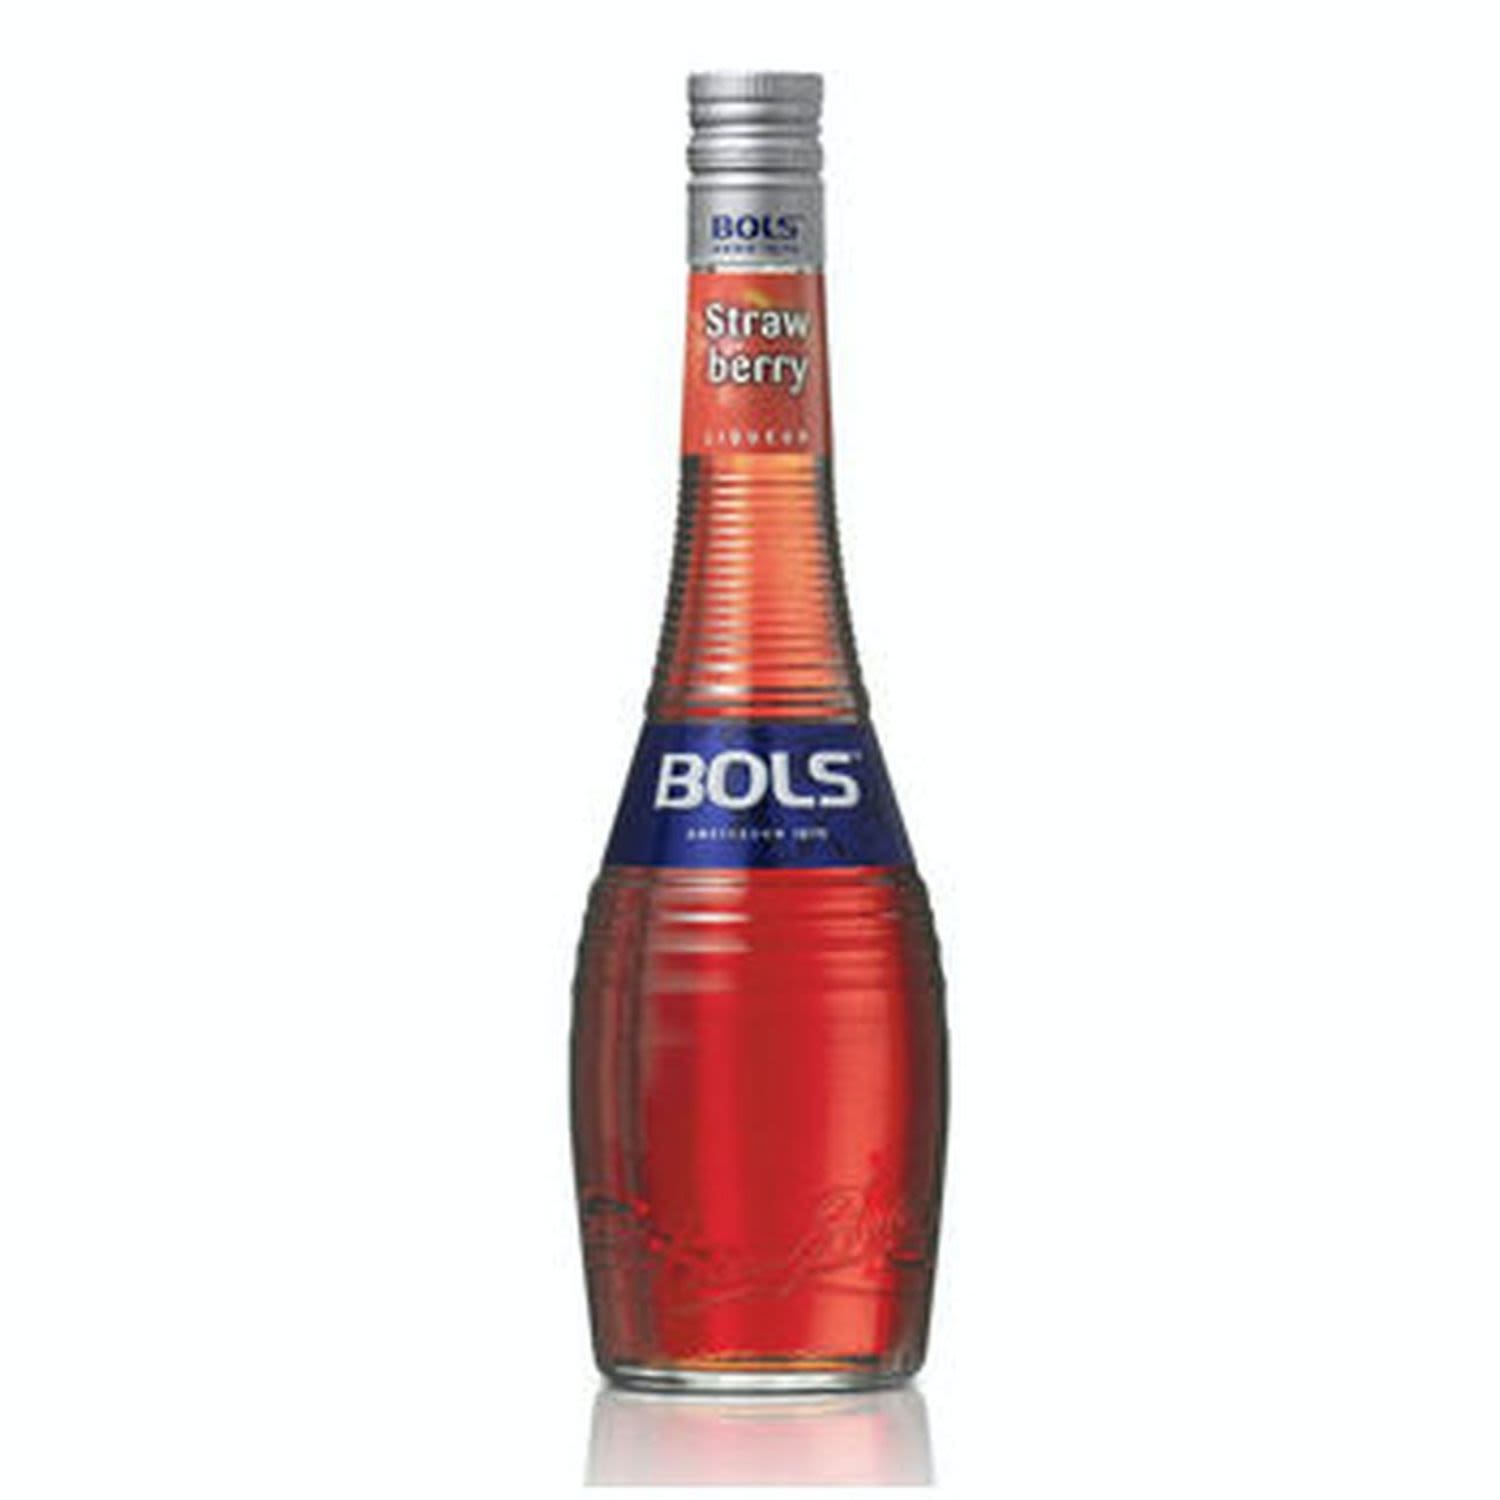 Bols Strawberry is a rich, striking red liqueur, containing fresh strawberry juice. With a deliciously fresh, powerful, and not overly sweet strawberry flavour, Bols Strawberry is the perfect ingredient for delicious yet easy to make cocktails.<br /> <br />Alcohol Volume: 17.00%<br /><br />Pack Format: Bottle<br /><br />Standard Drinks: 6.7</br /><br />Pack Type: Bottle<br /><br />Country of Origin: Netherlands<br />